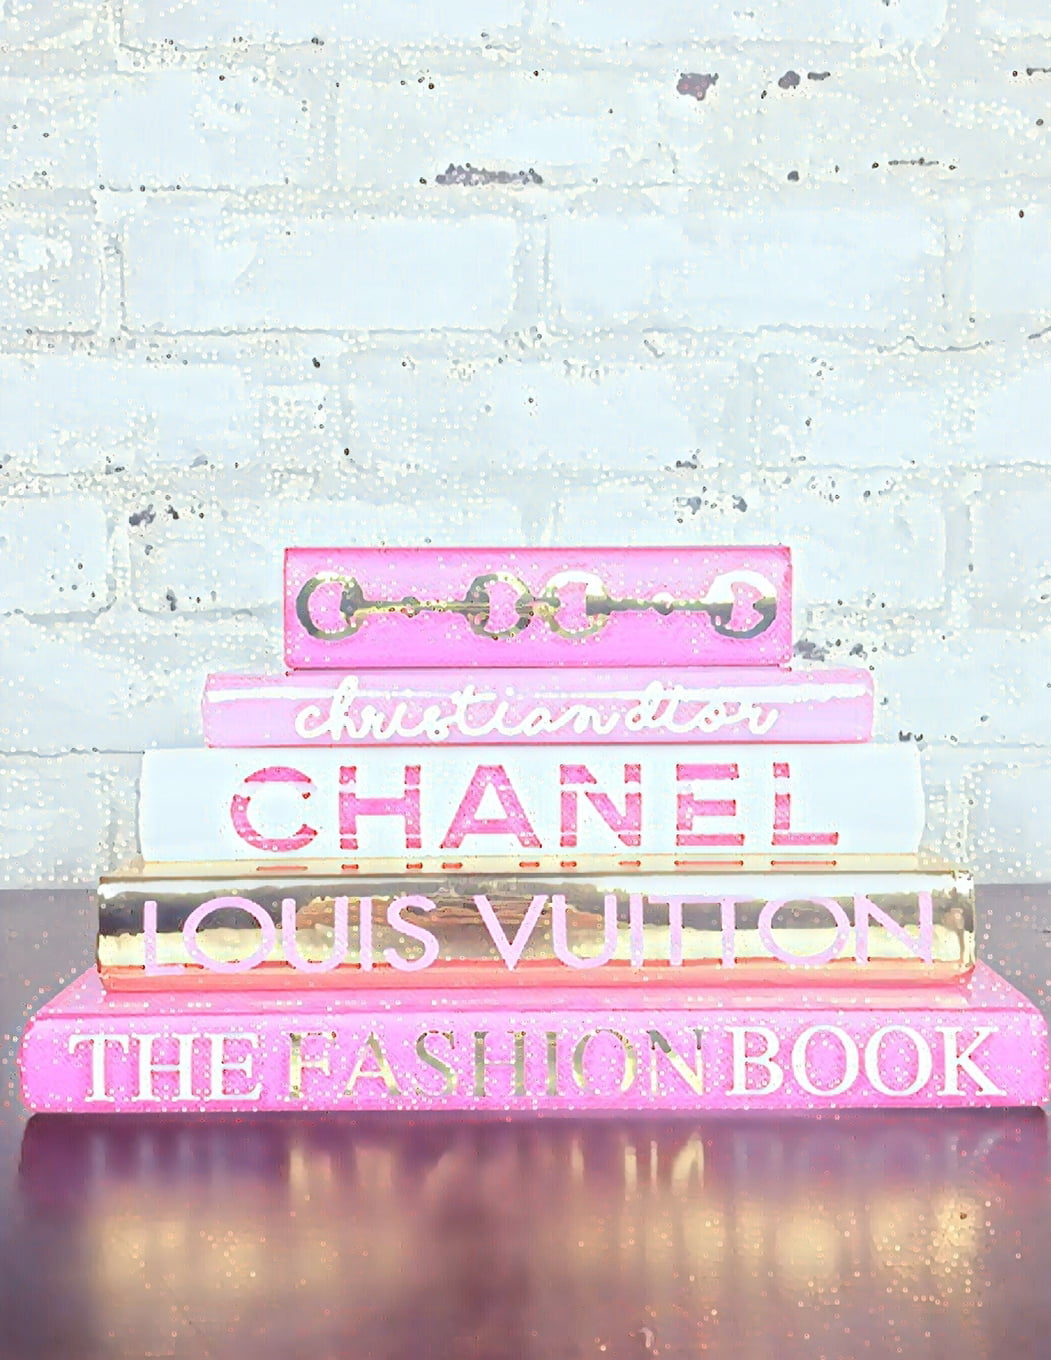 Louis Vuitton, Chanel, Christian Dior, in All Things Pink : BLANK  composition notebook 8.5 x 11, 118 DOT GRID PAGES (Paperback)